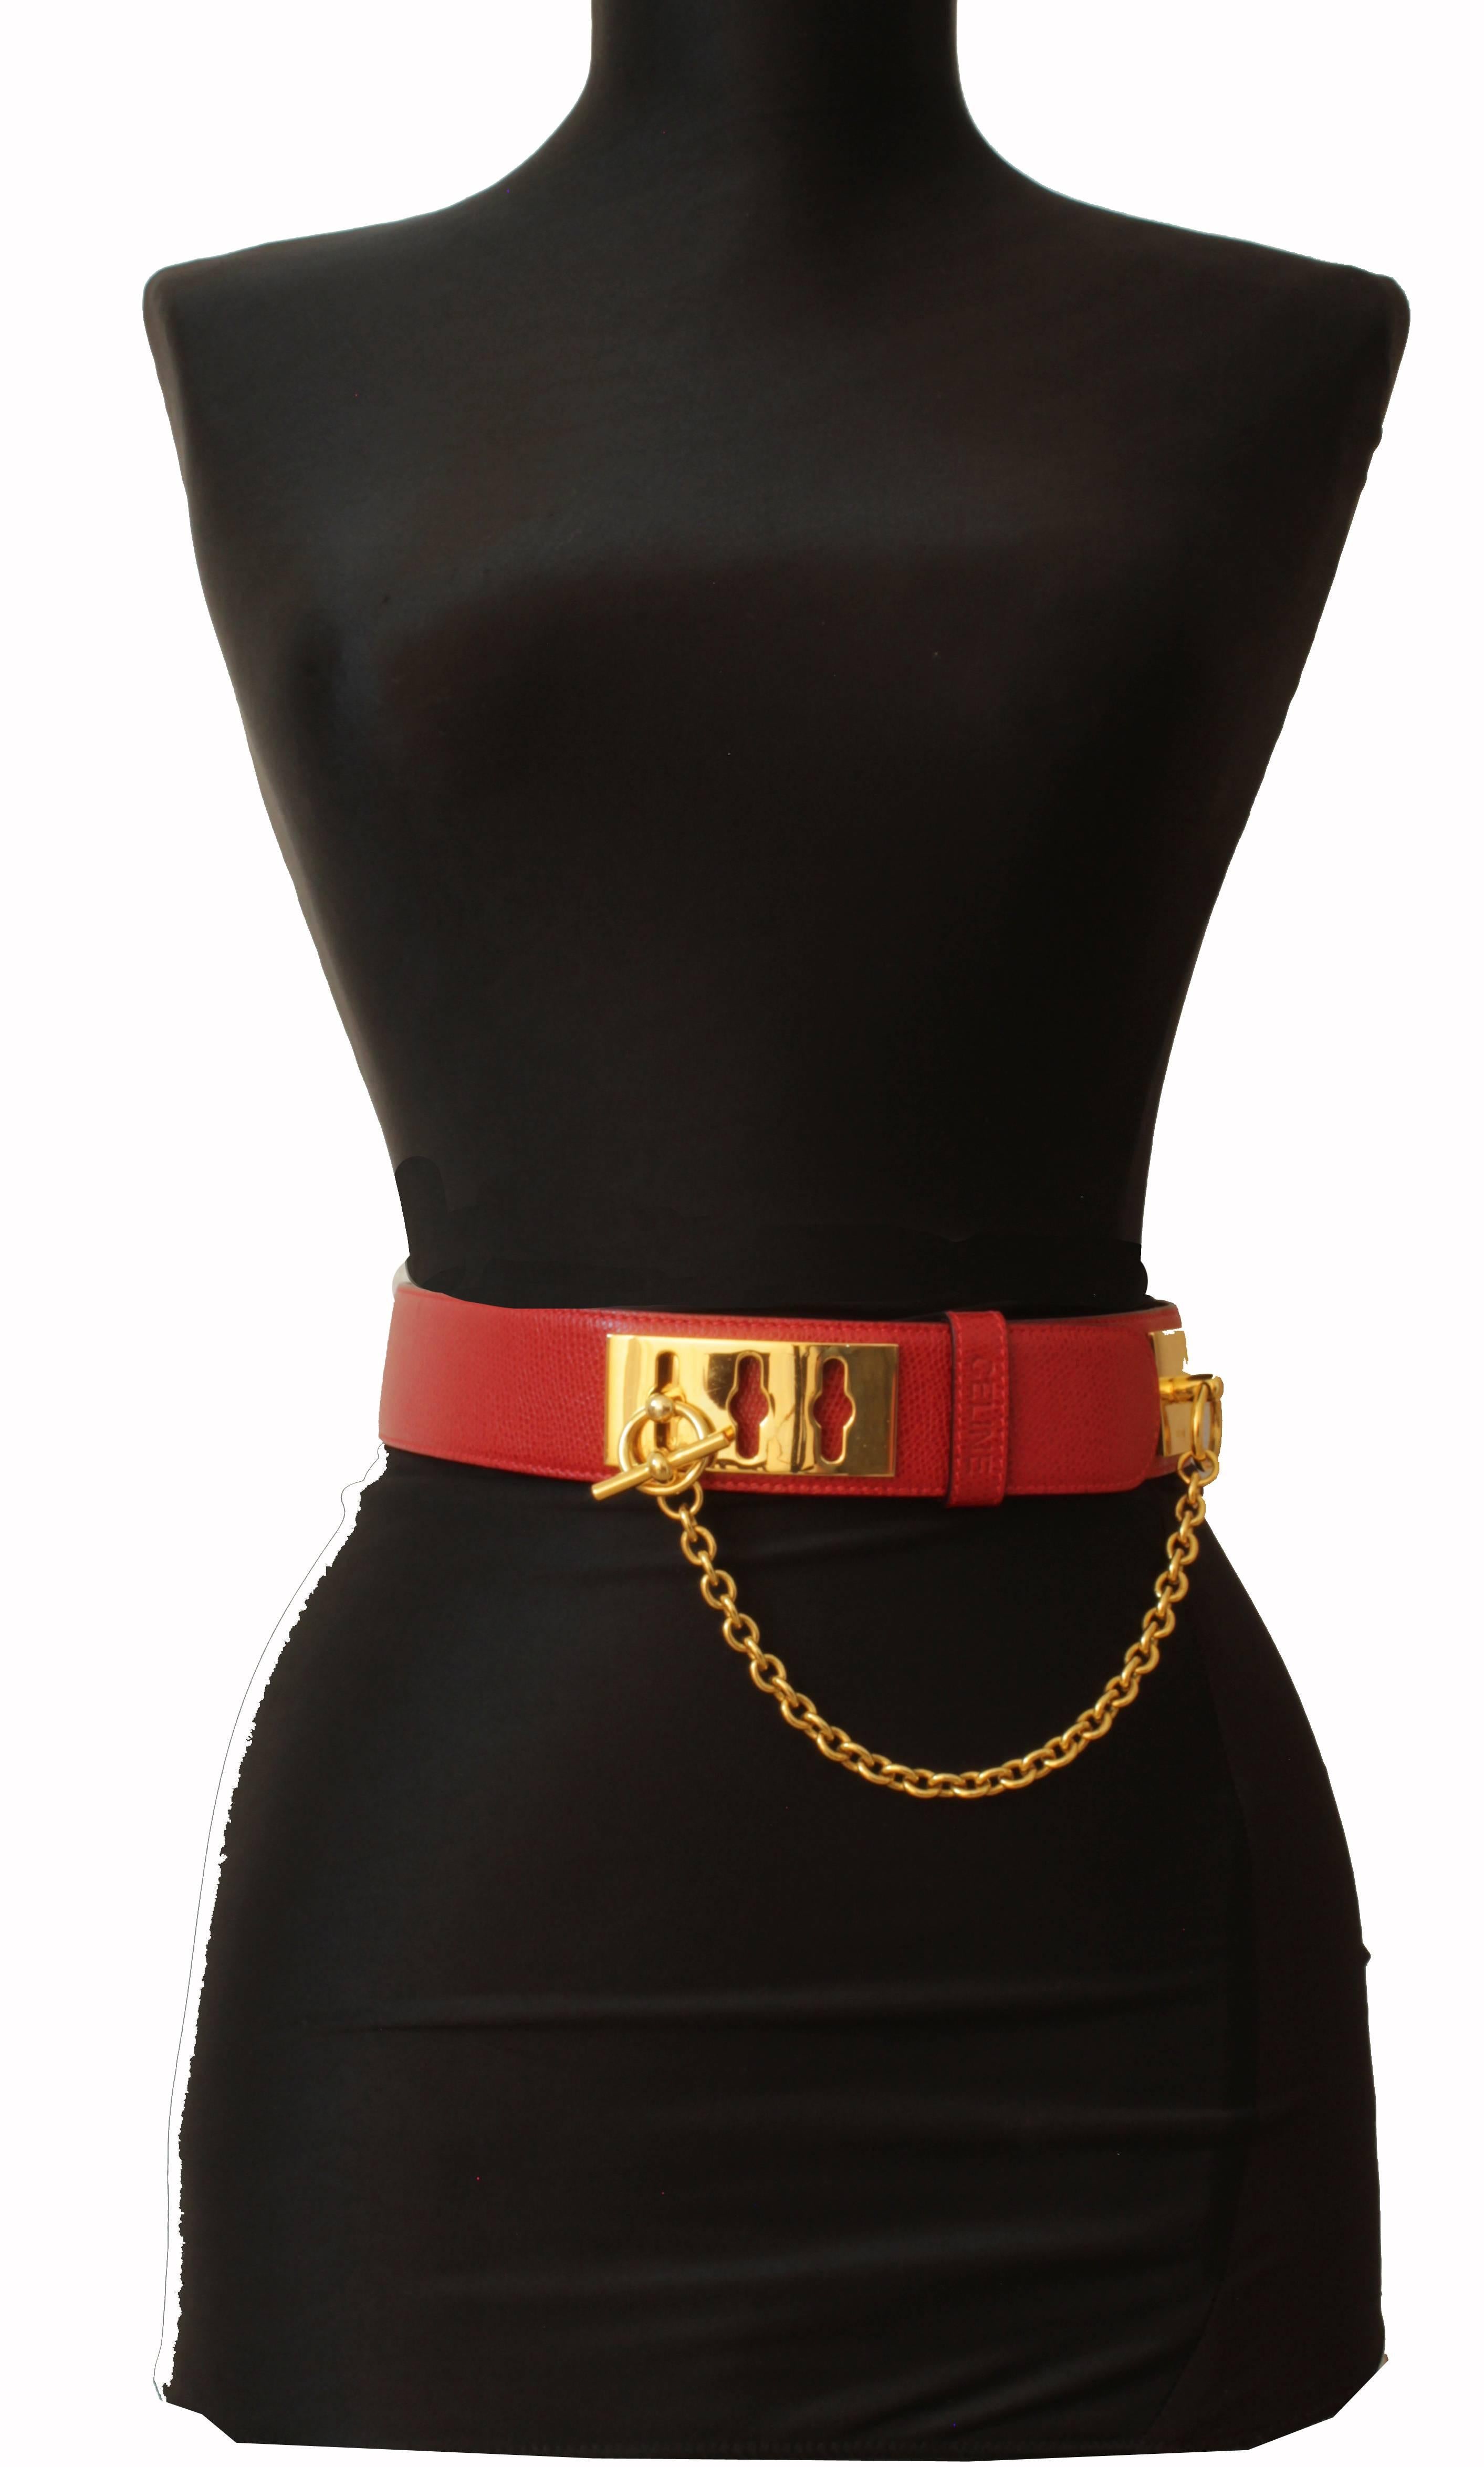 Here's a chic leather belt from Celine Paris.  Made from red leather, it features a gold plate and loop fastener with gold chain.  Tagged size 65cm, this best fits a waist between 24 - 26in.  It measures 32in total length and is 1.5in wide.  Stamped